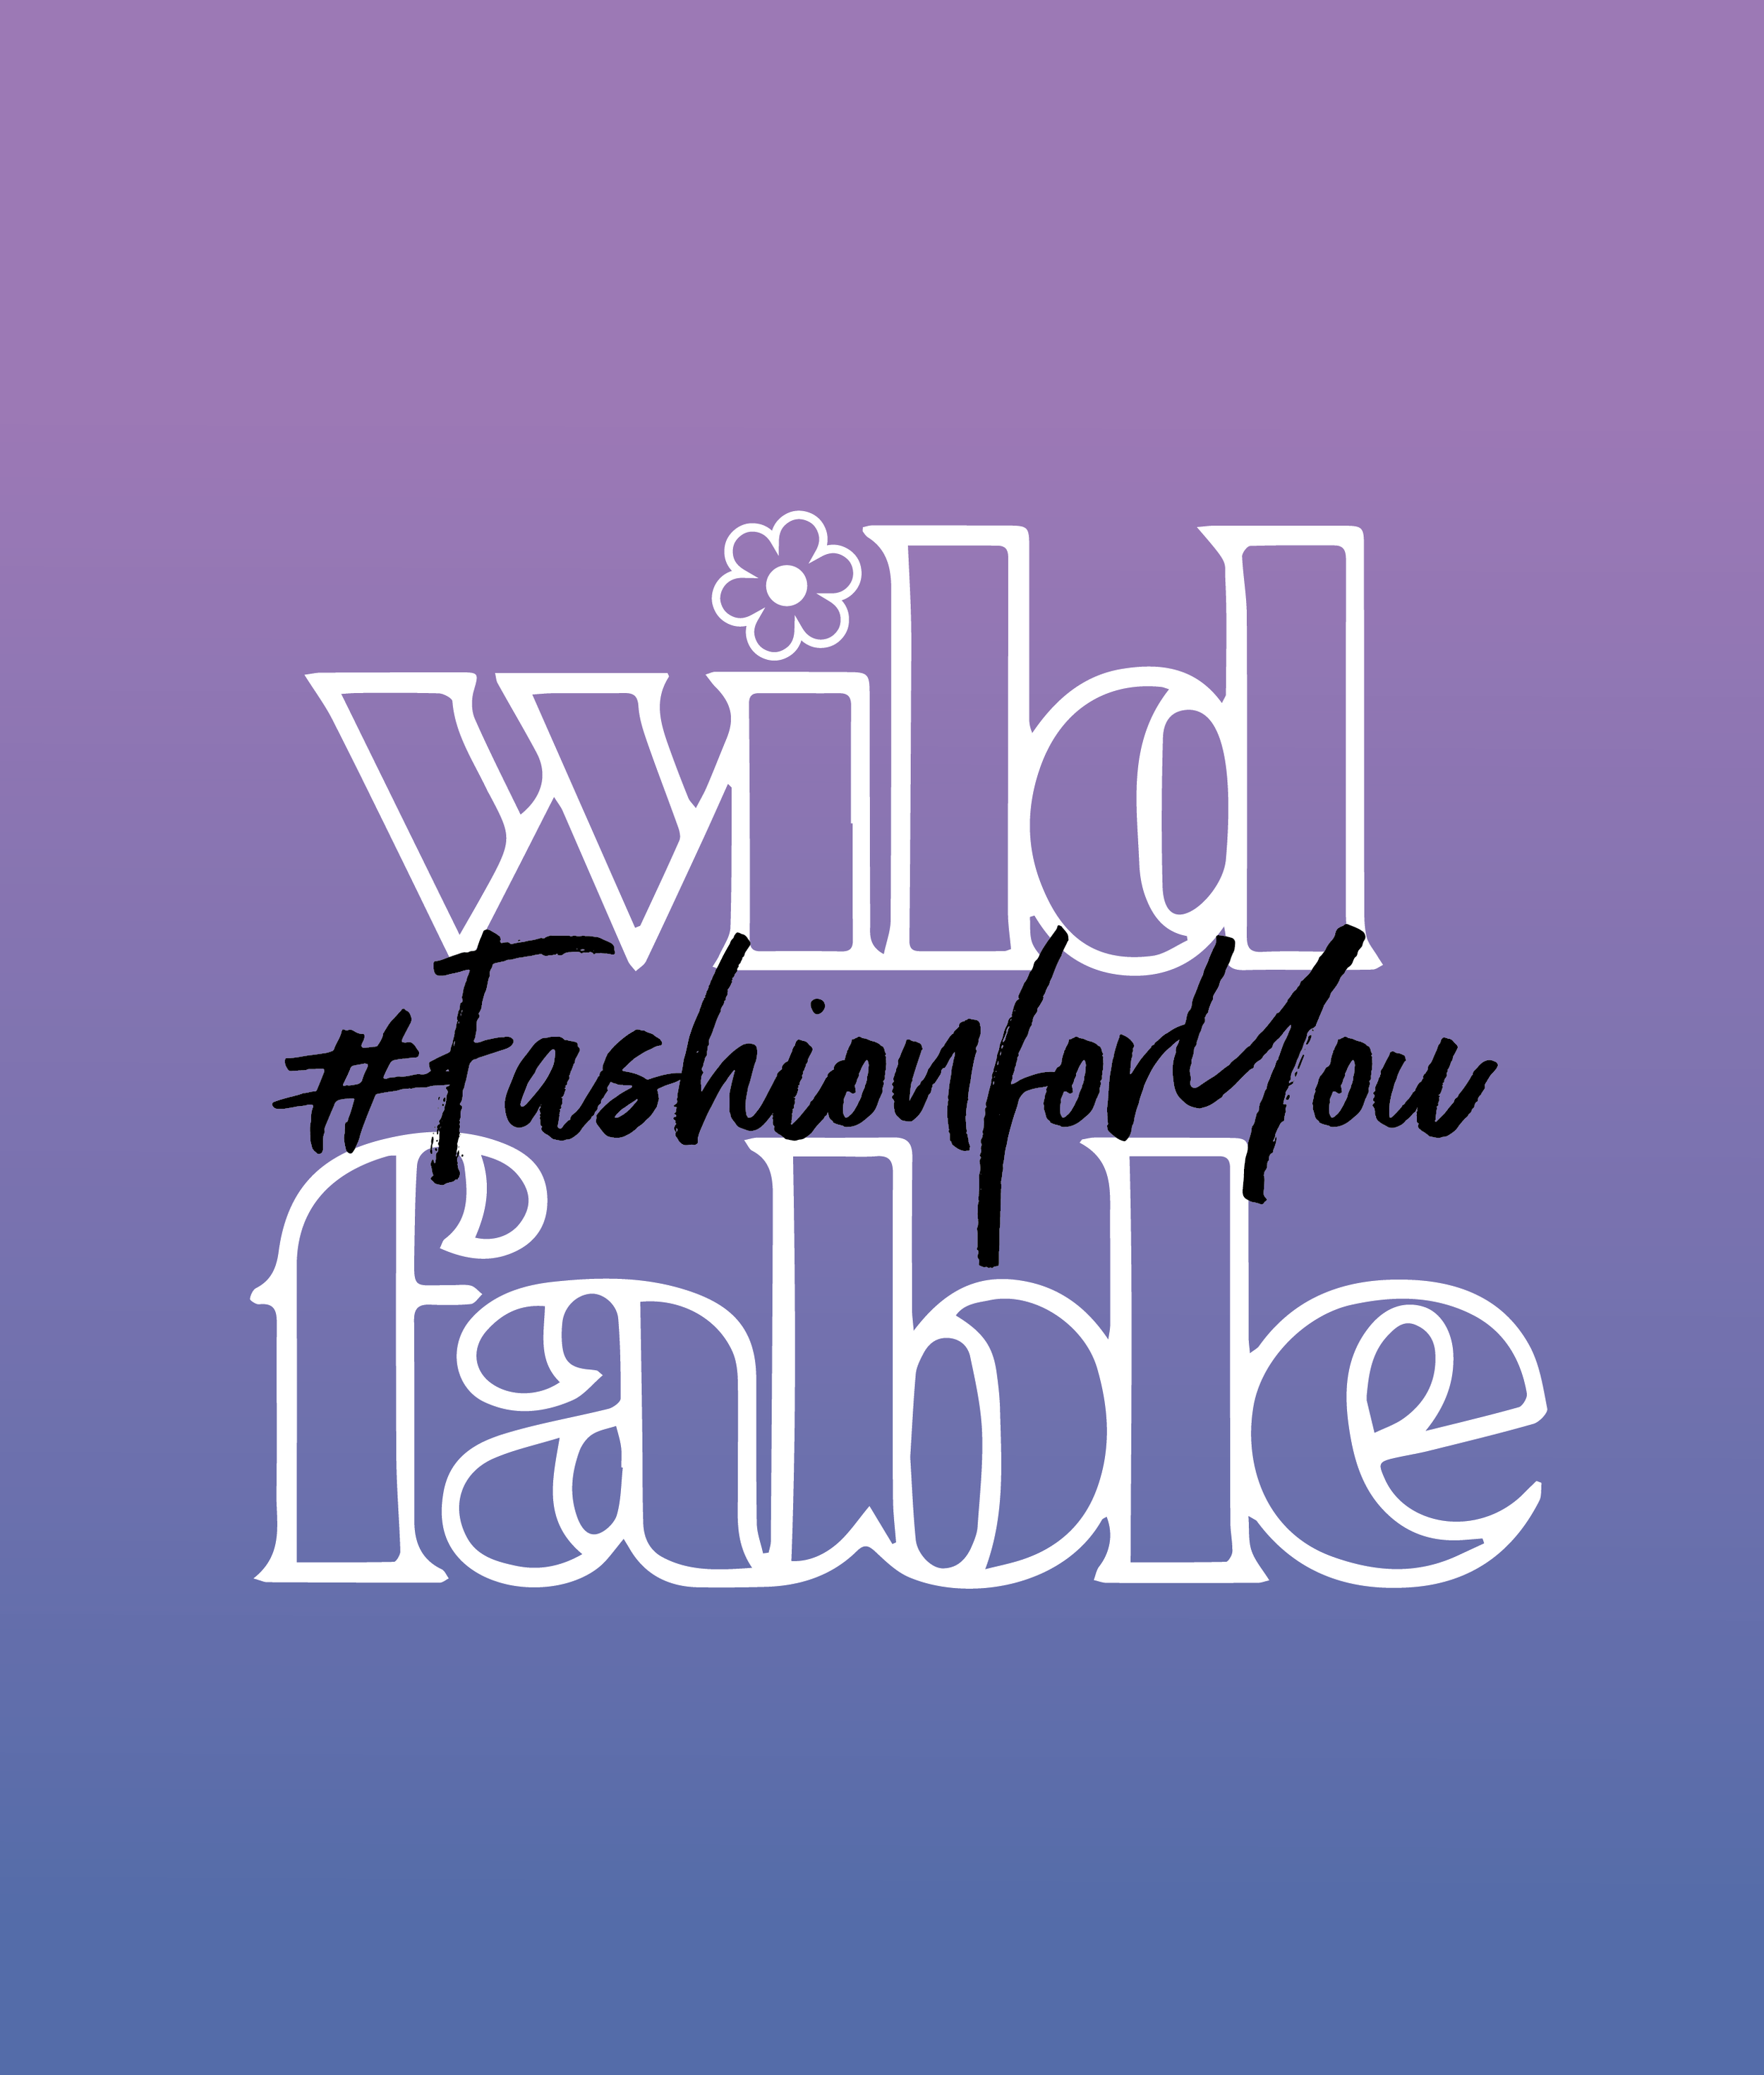 Wild Fable #Fashion For You Immersive Advertising Event — Creative Krystal